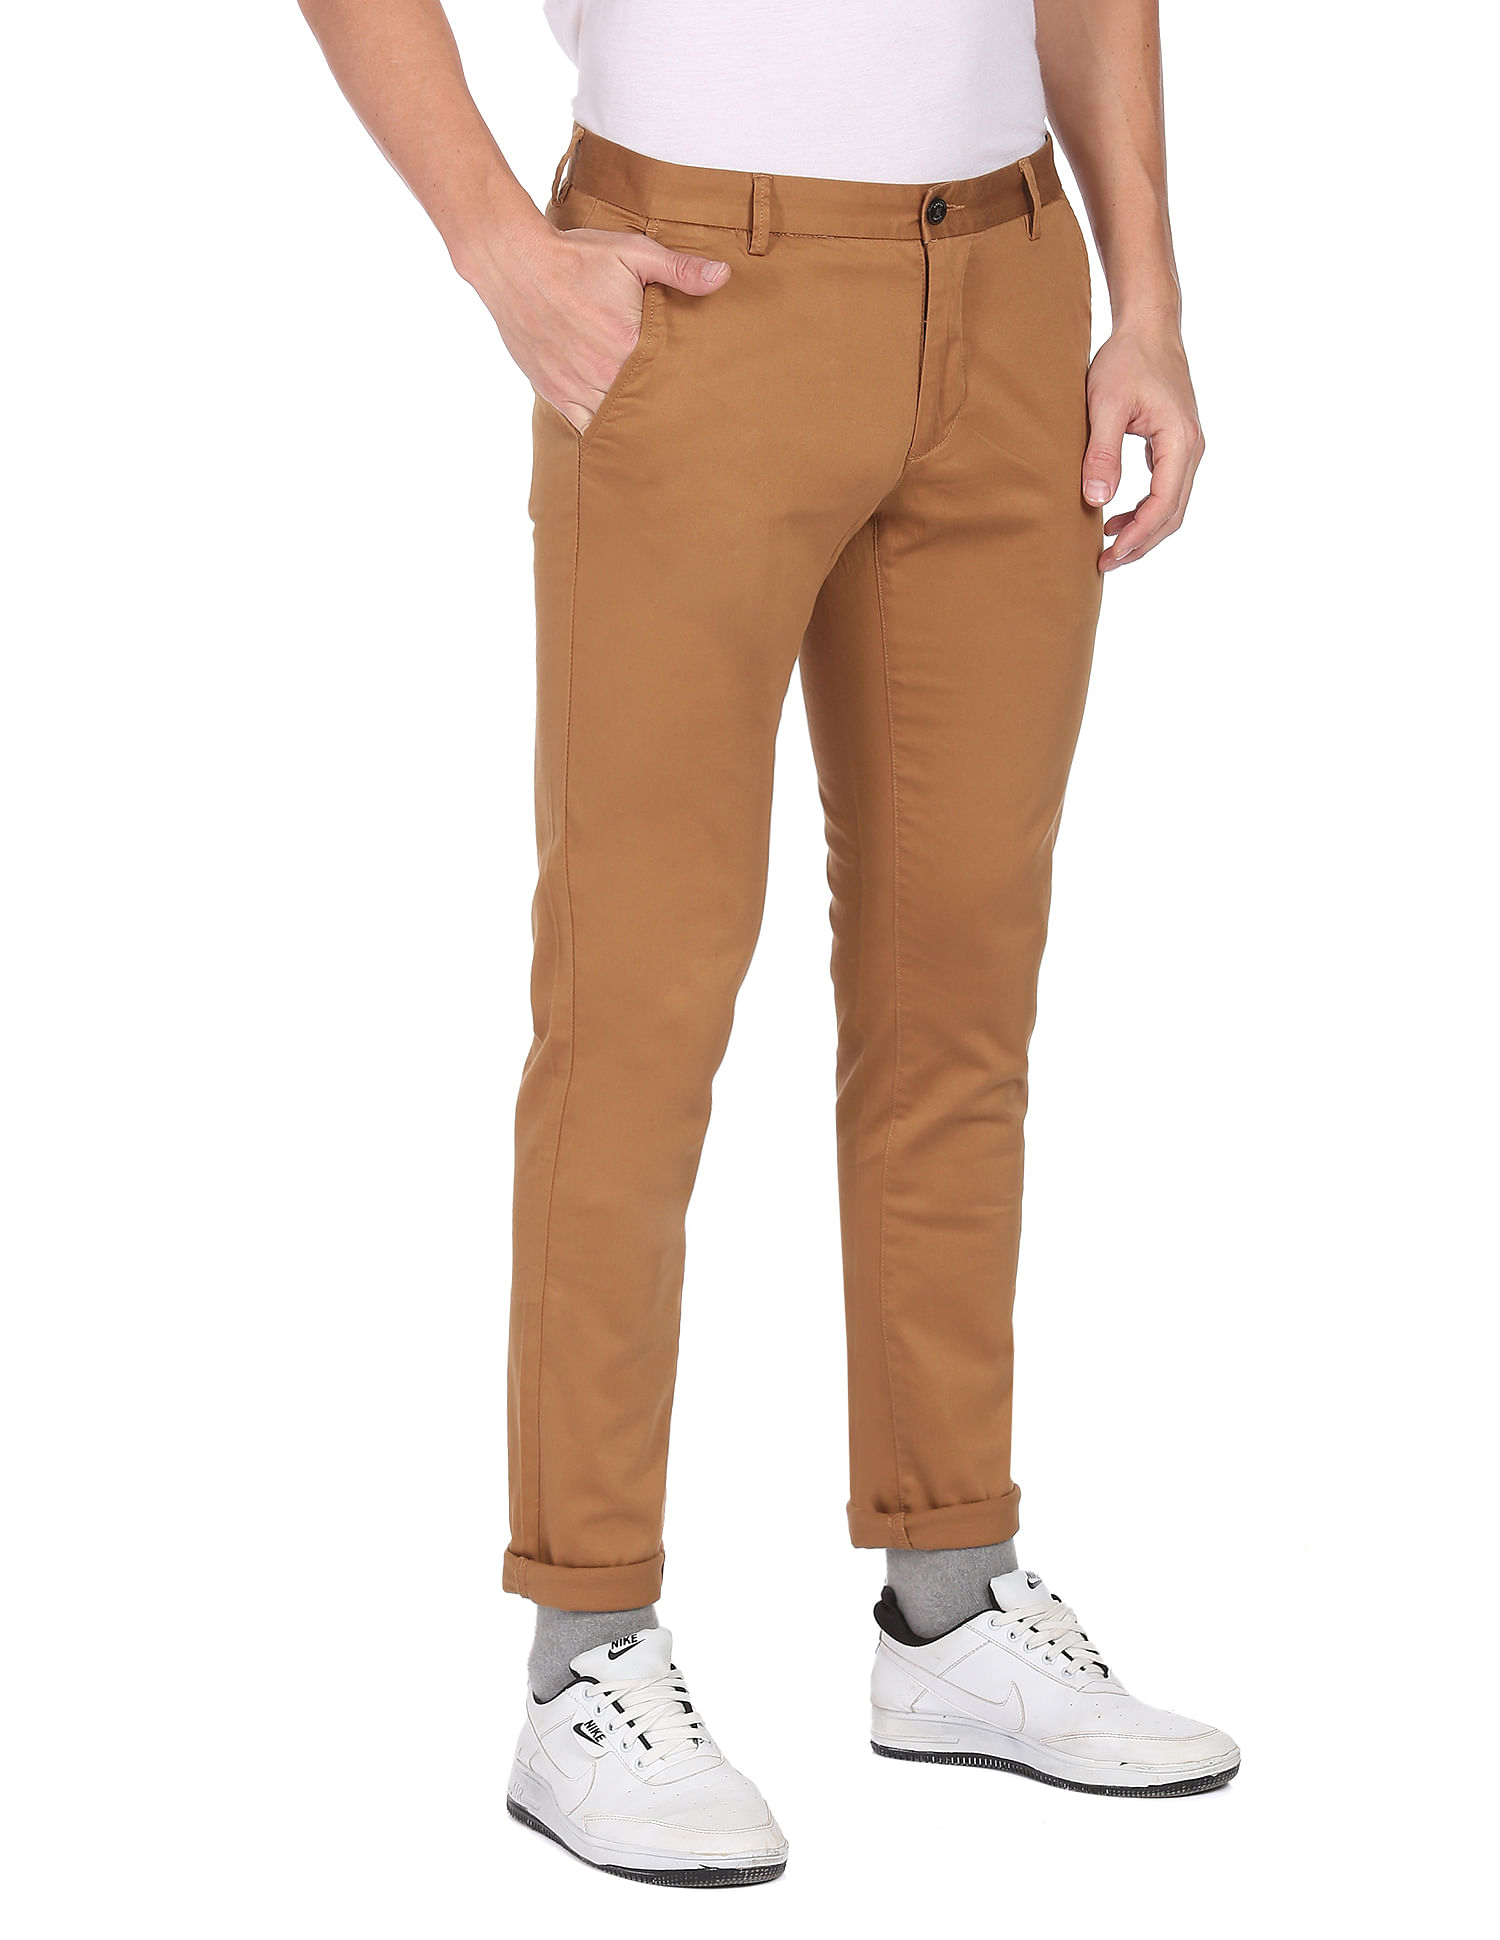 Share more than 78 arrow pants casual latest